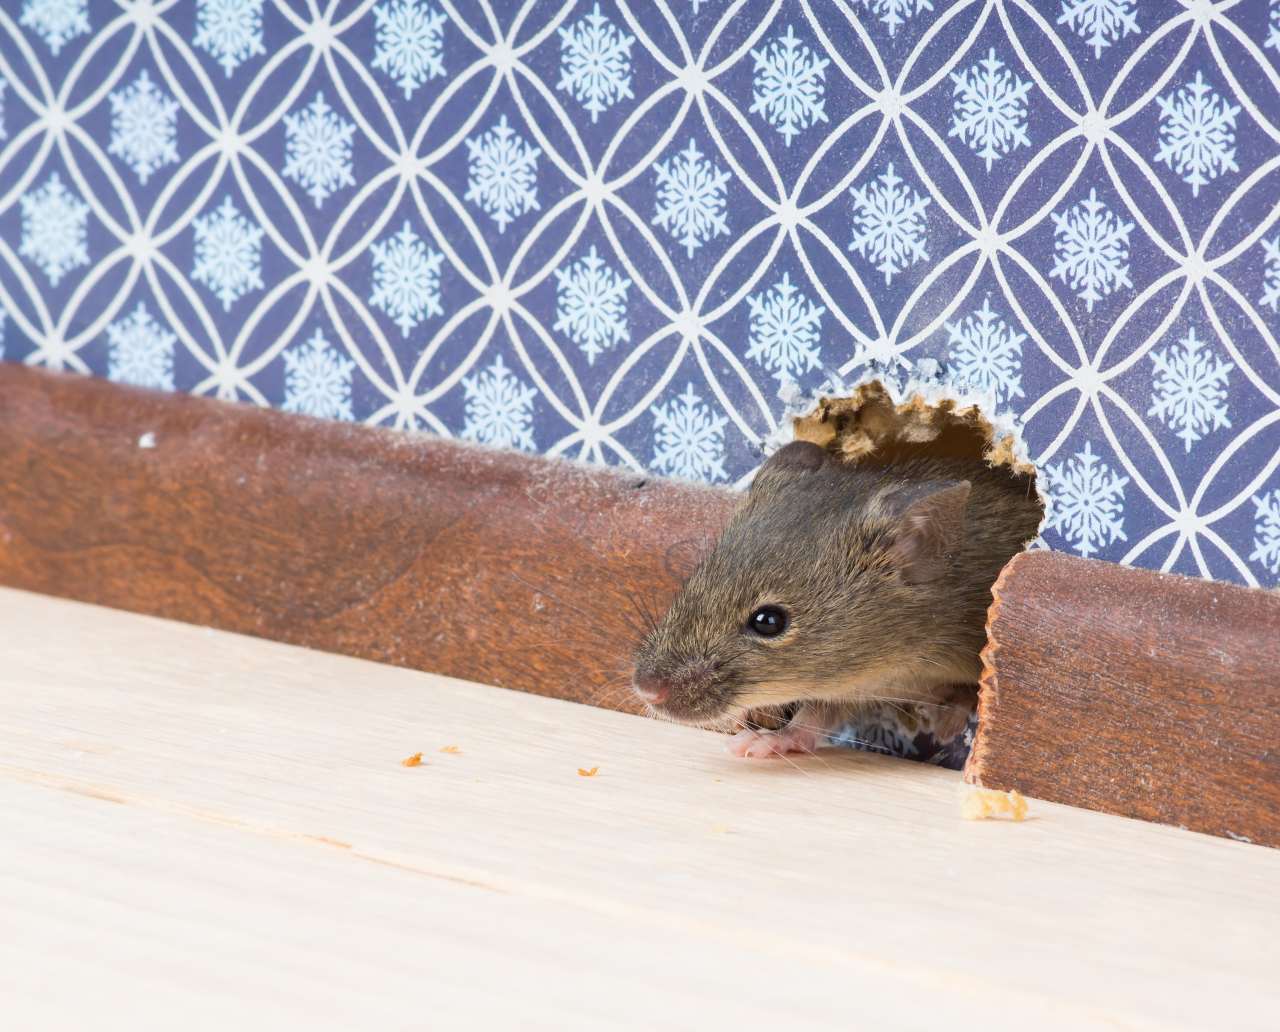 A brown mouse sticks its head out of a hole in a wall with blue and white wallpaper.